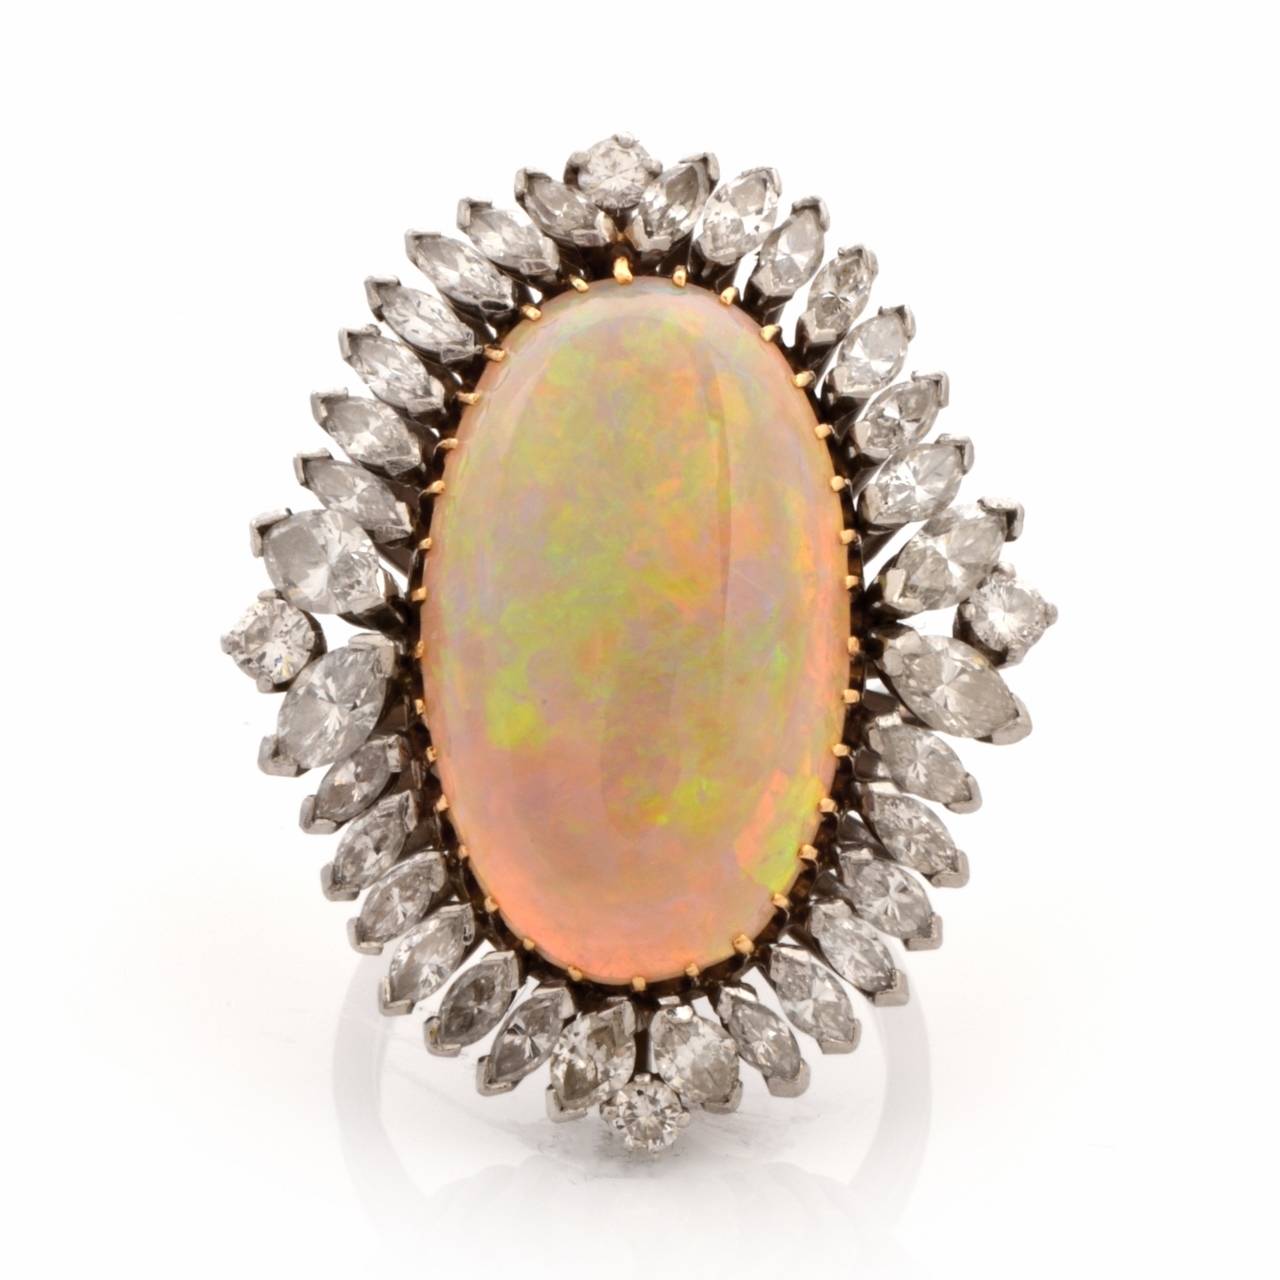 This conspicuous vintage ring with an oval-cut opal cabochon and marquise diamonds is crafted in platinum and weighs approximately 15.6 grams.  Incorporating an aesthetically alluring ovular plaque, it is centered  with an eye-catching fine opal